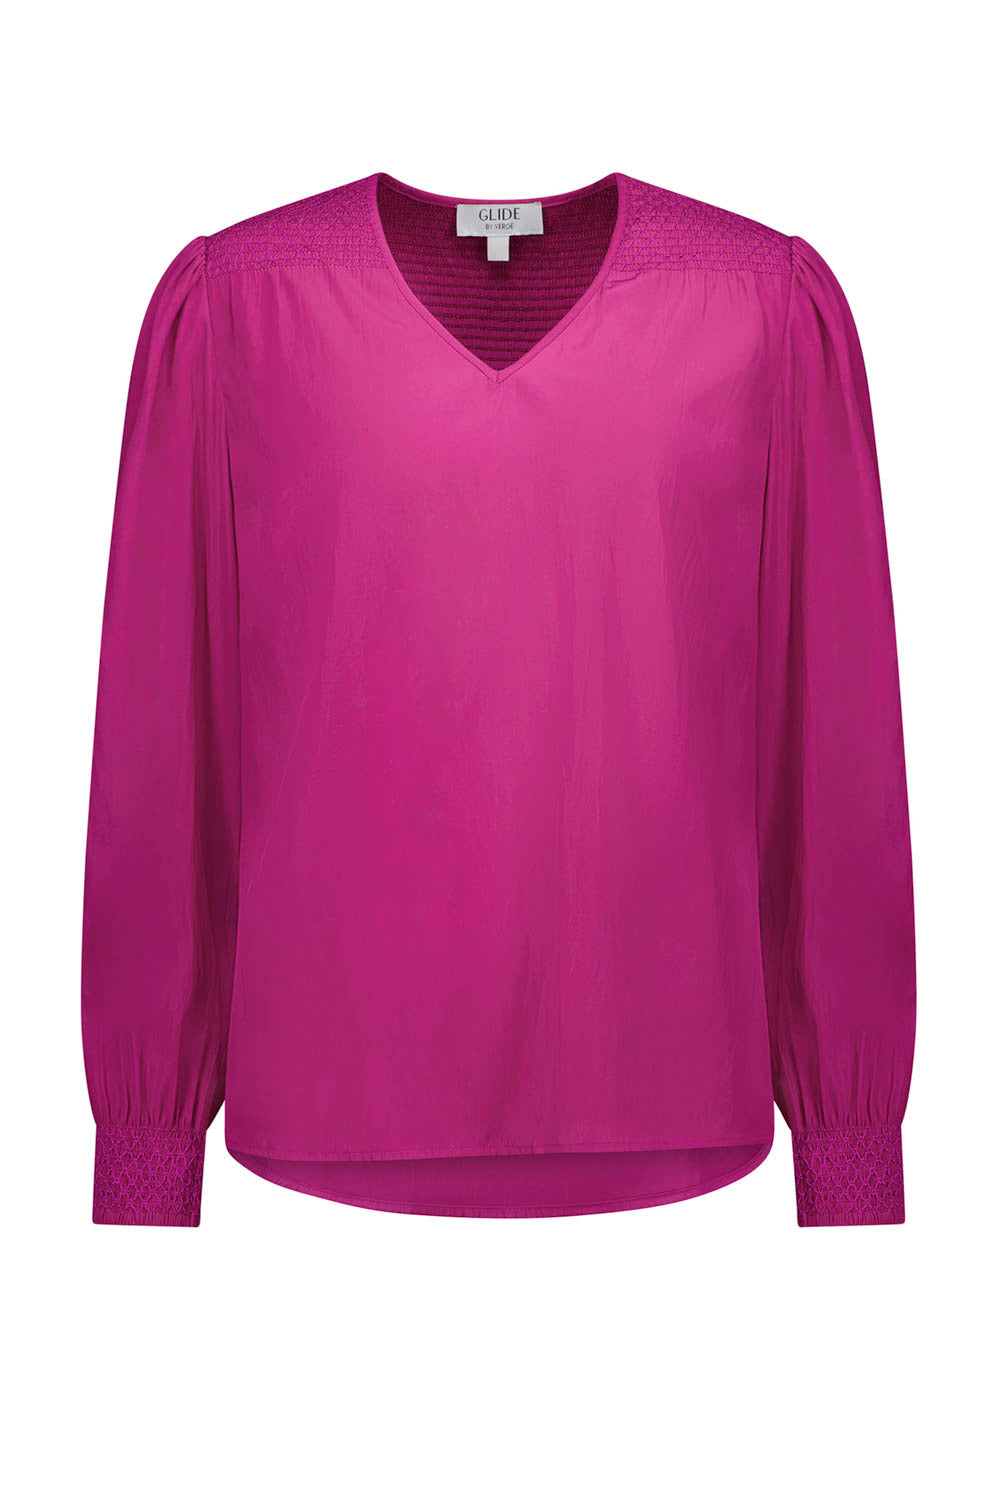 Glide by Verge - Tangled Blouse - Orchid - Blouse VERGE